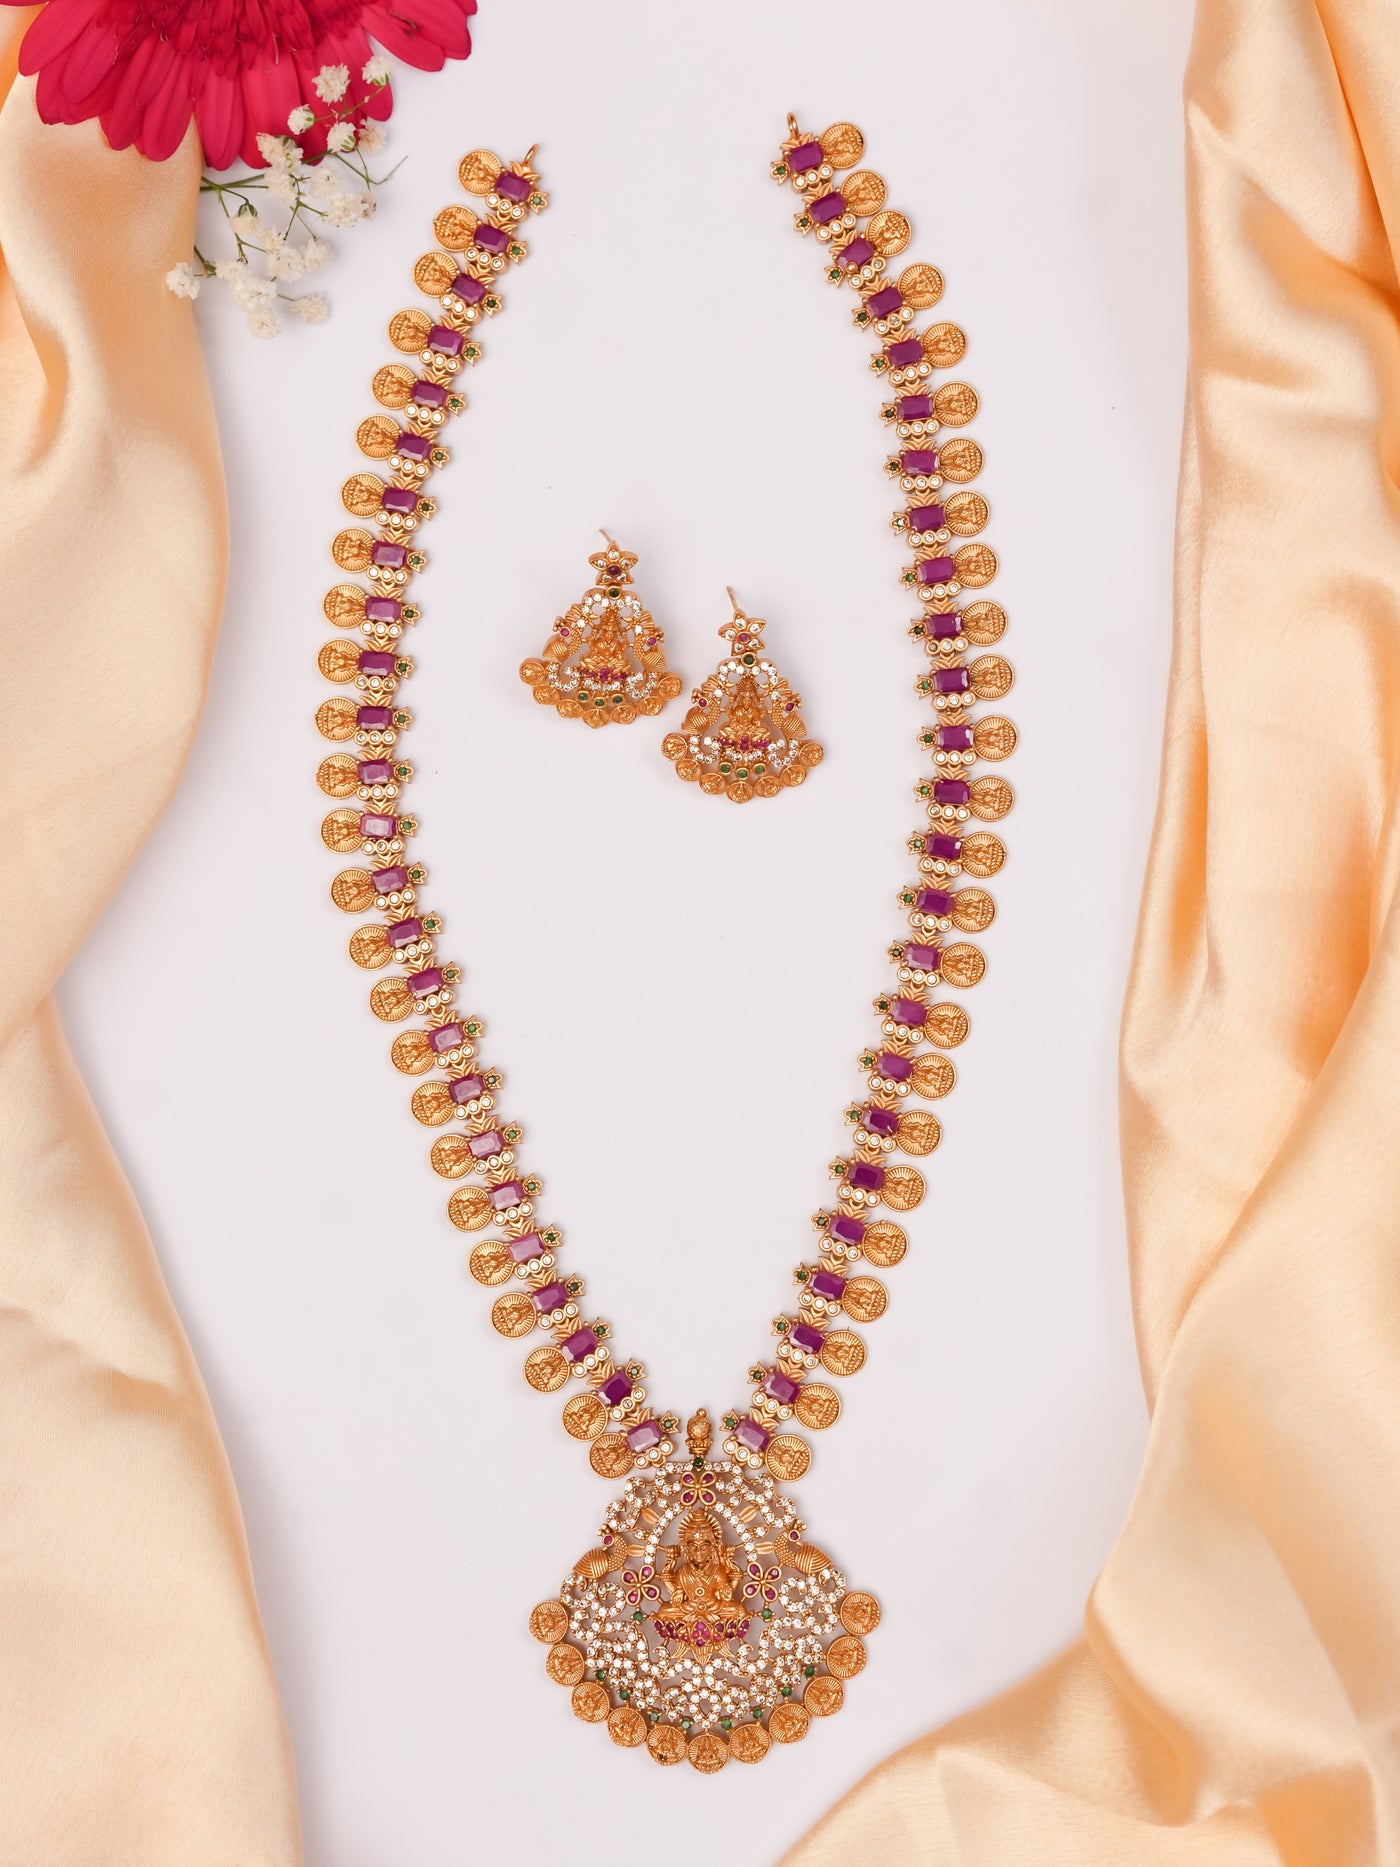 Lakshmi Haram | Kasula Haram | Lakshmi Kasula Haram |Lakshmi Devi Haram | Laxmi Kasula Haram | Lakshmi Parivar Haram | Antique Lakshmi Haram | Lakshmi Kasu Haram| South indian Jewellery | Traditional Long haram